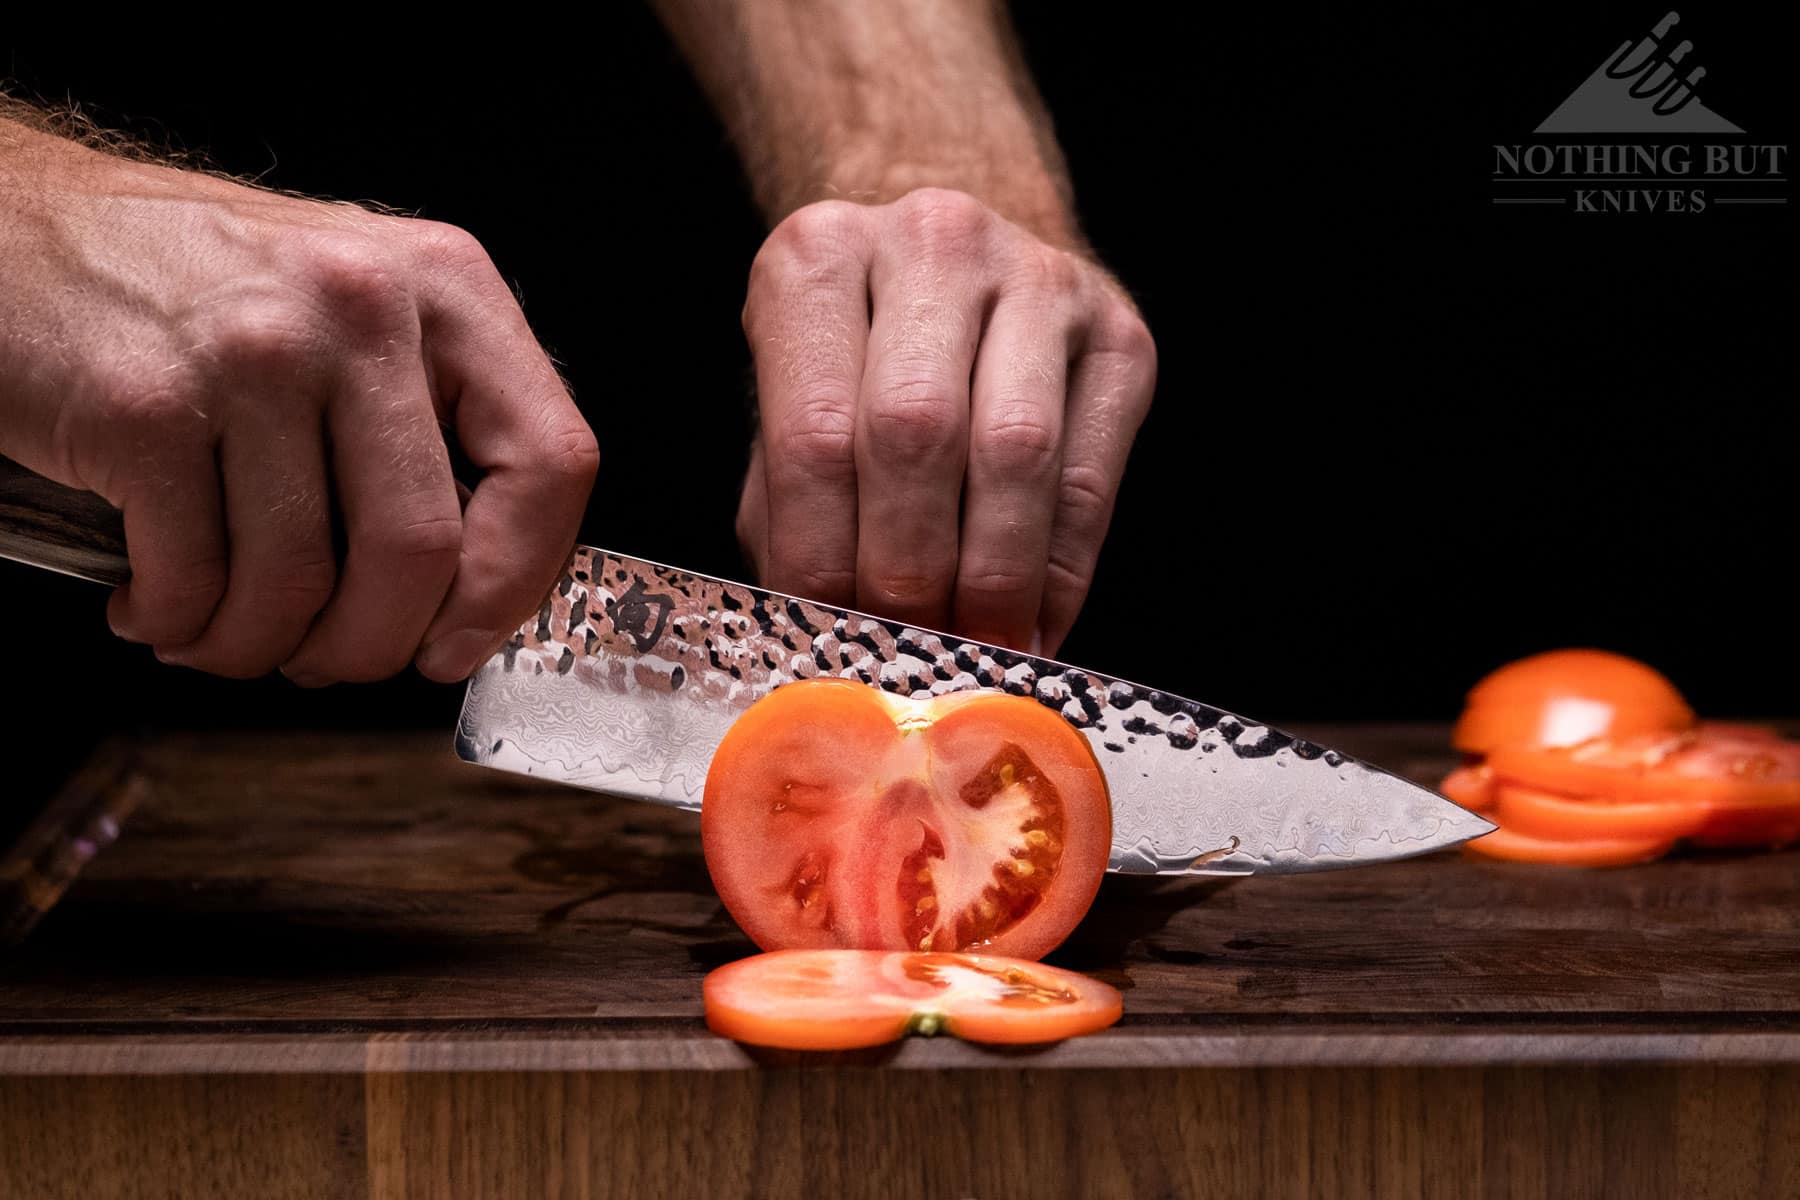 The Shun Premier chef knife easily slicing through a tomato to show the blades sharpness.